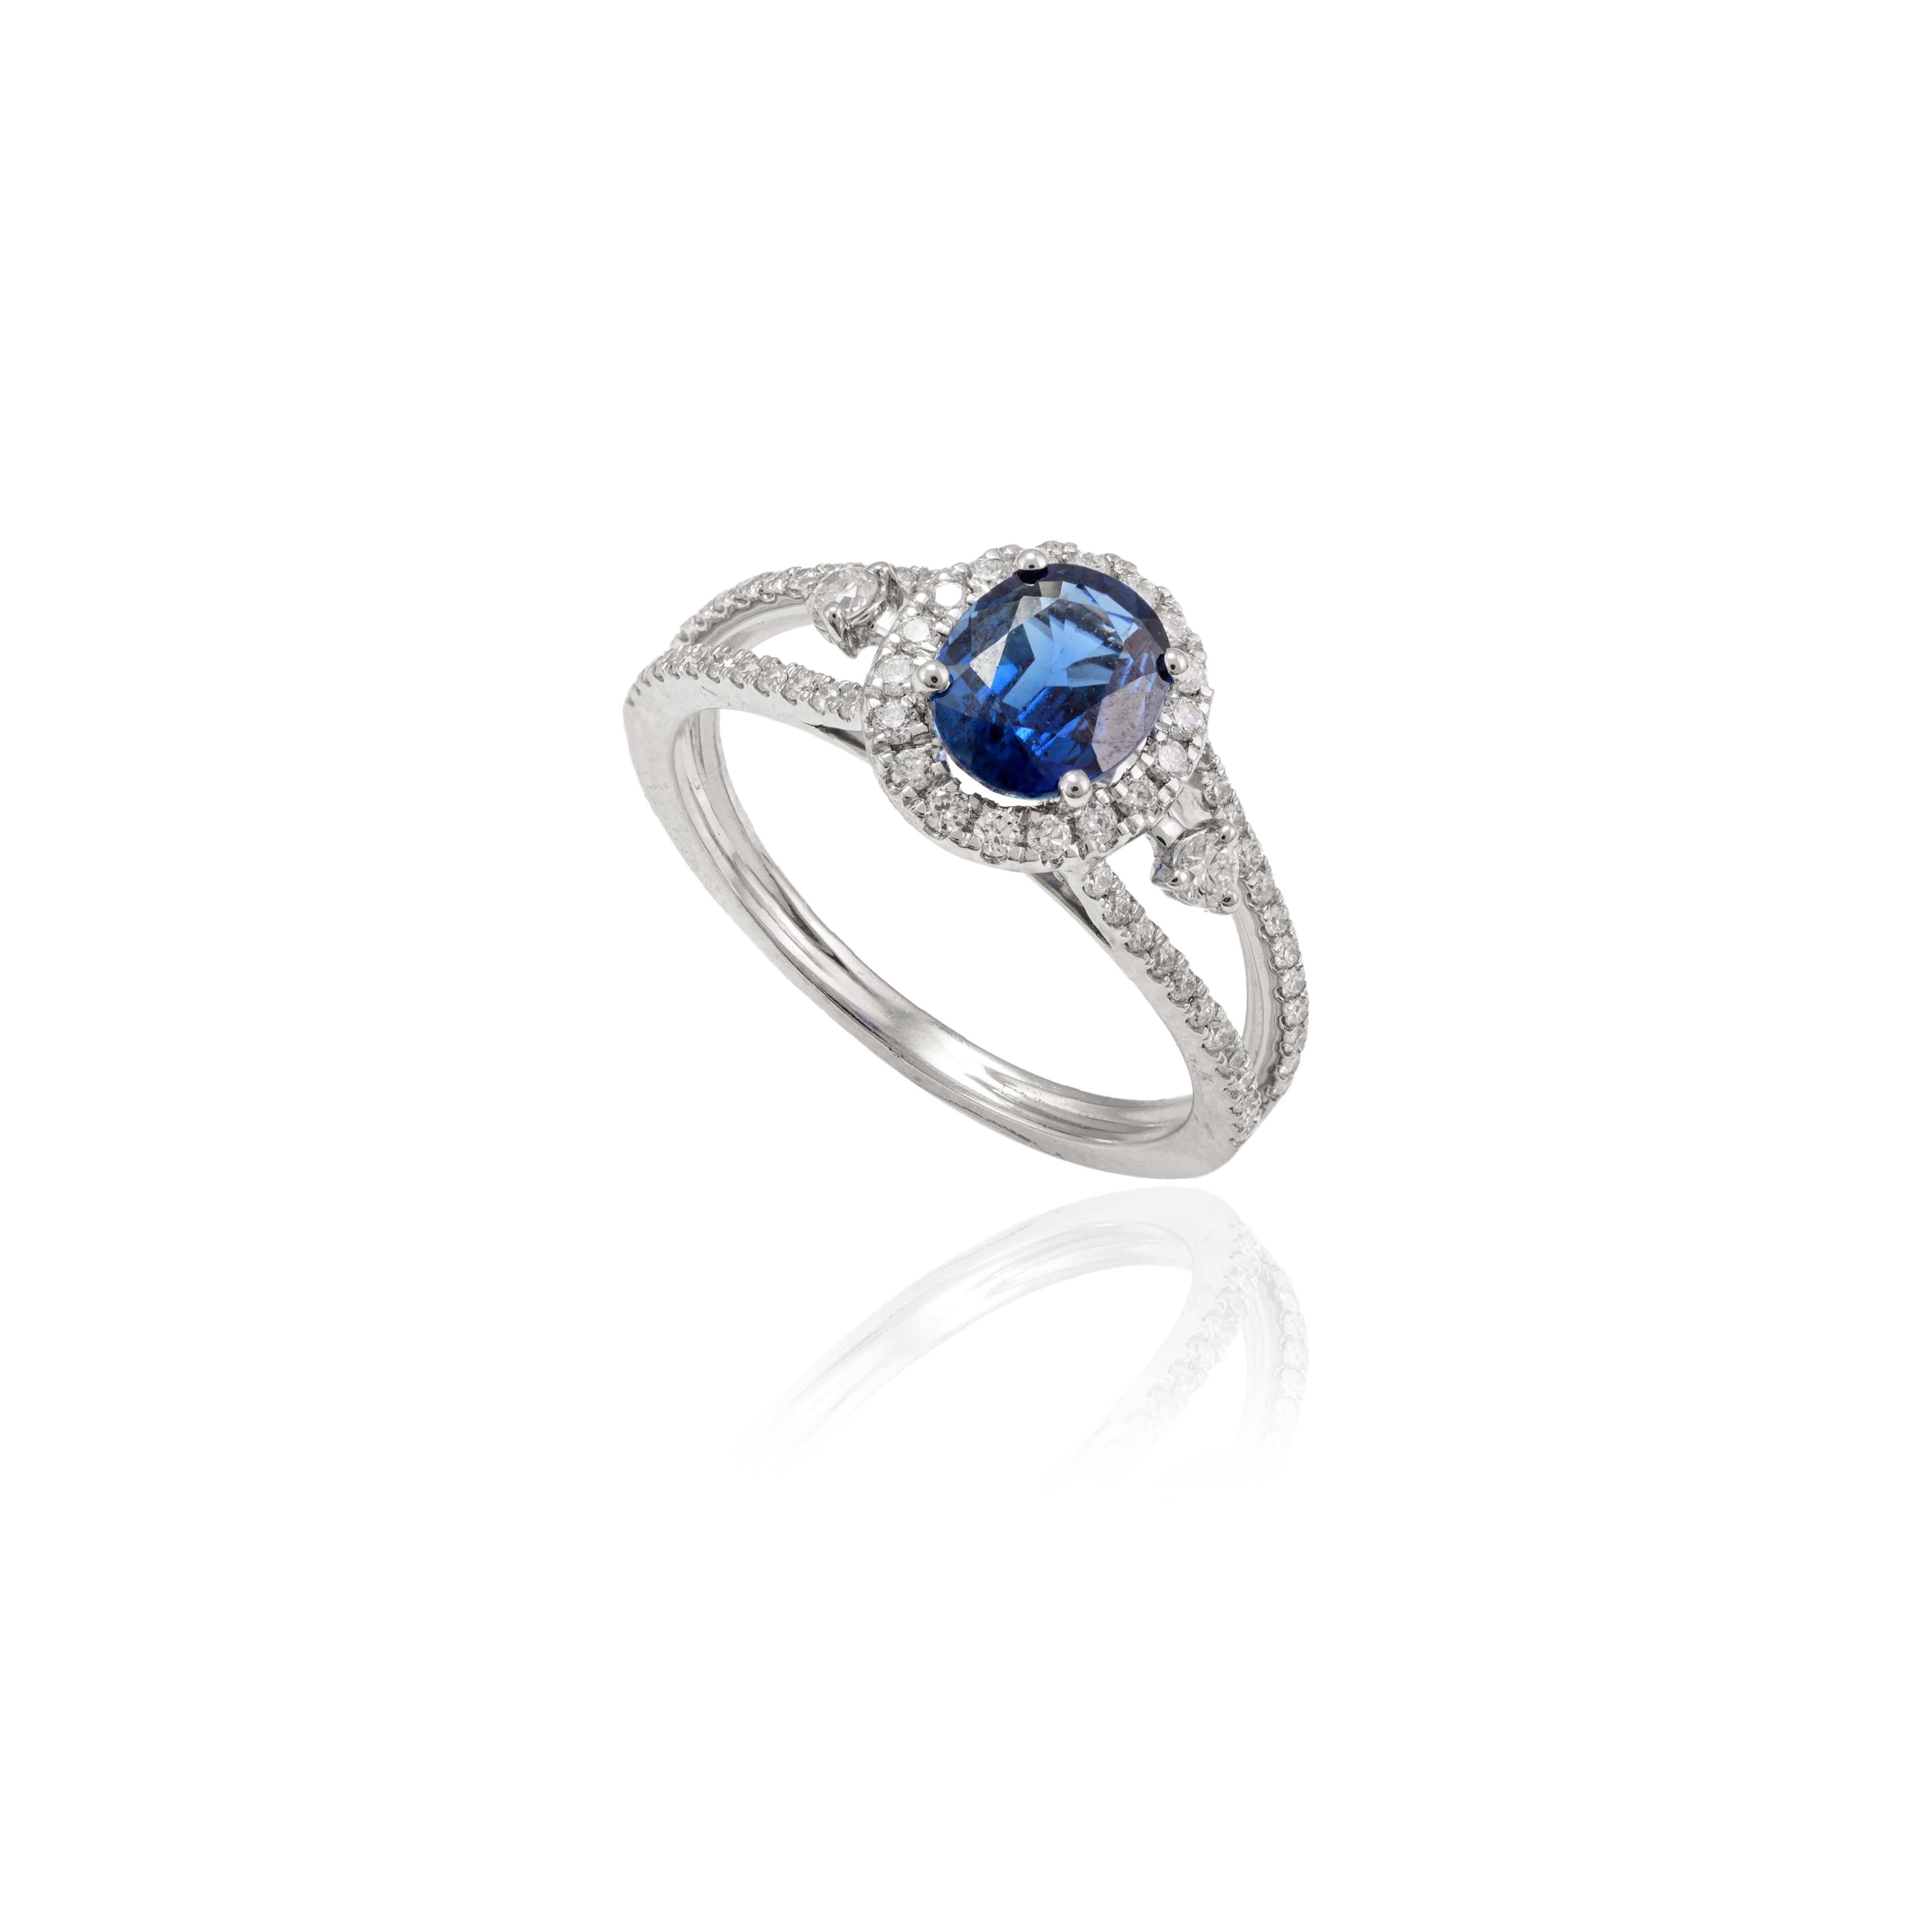 For Sale:  Certified Diamond and Oval Blue Sapphire Engagement Ring 18k Solid White Gold 4